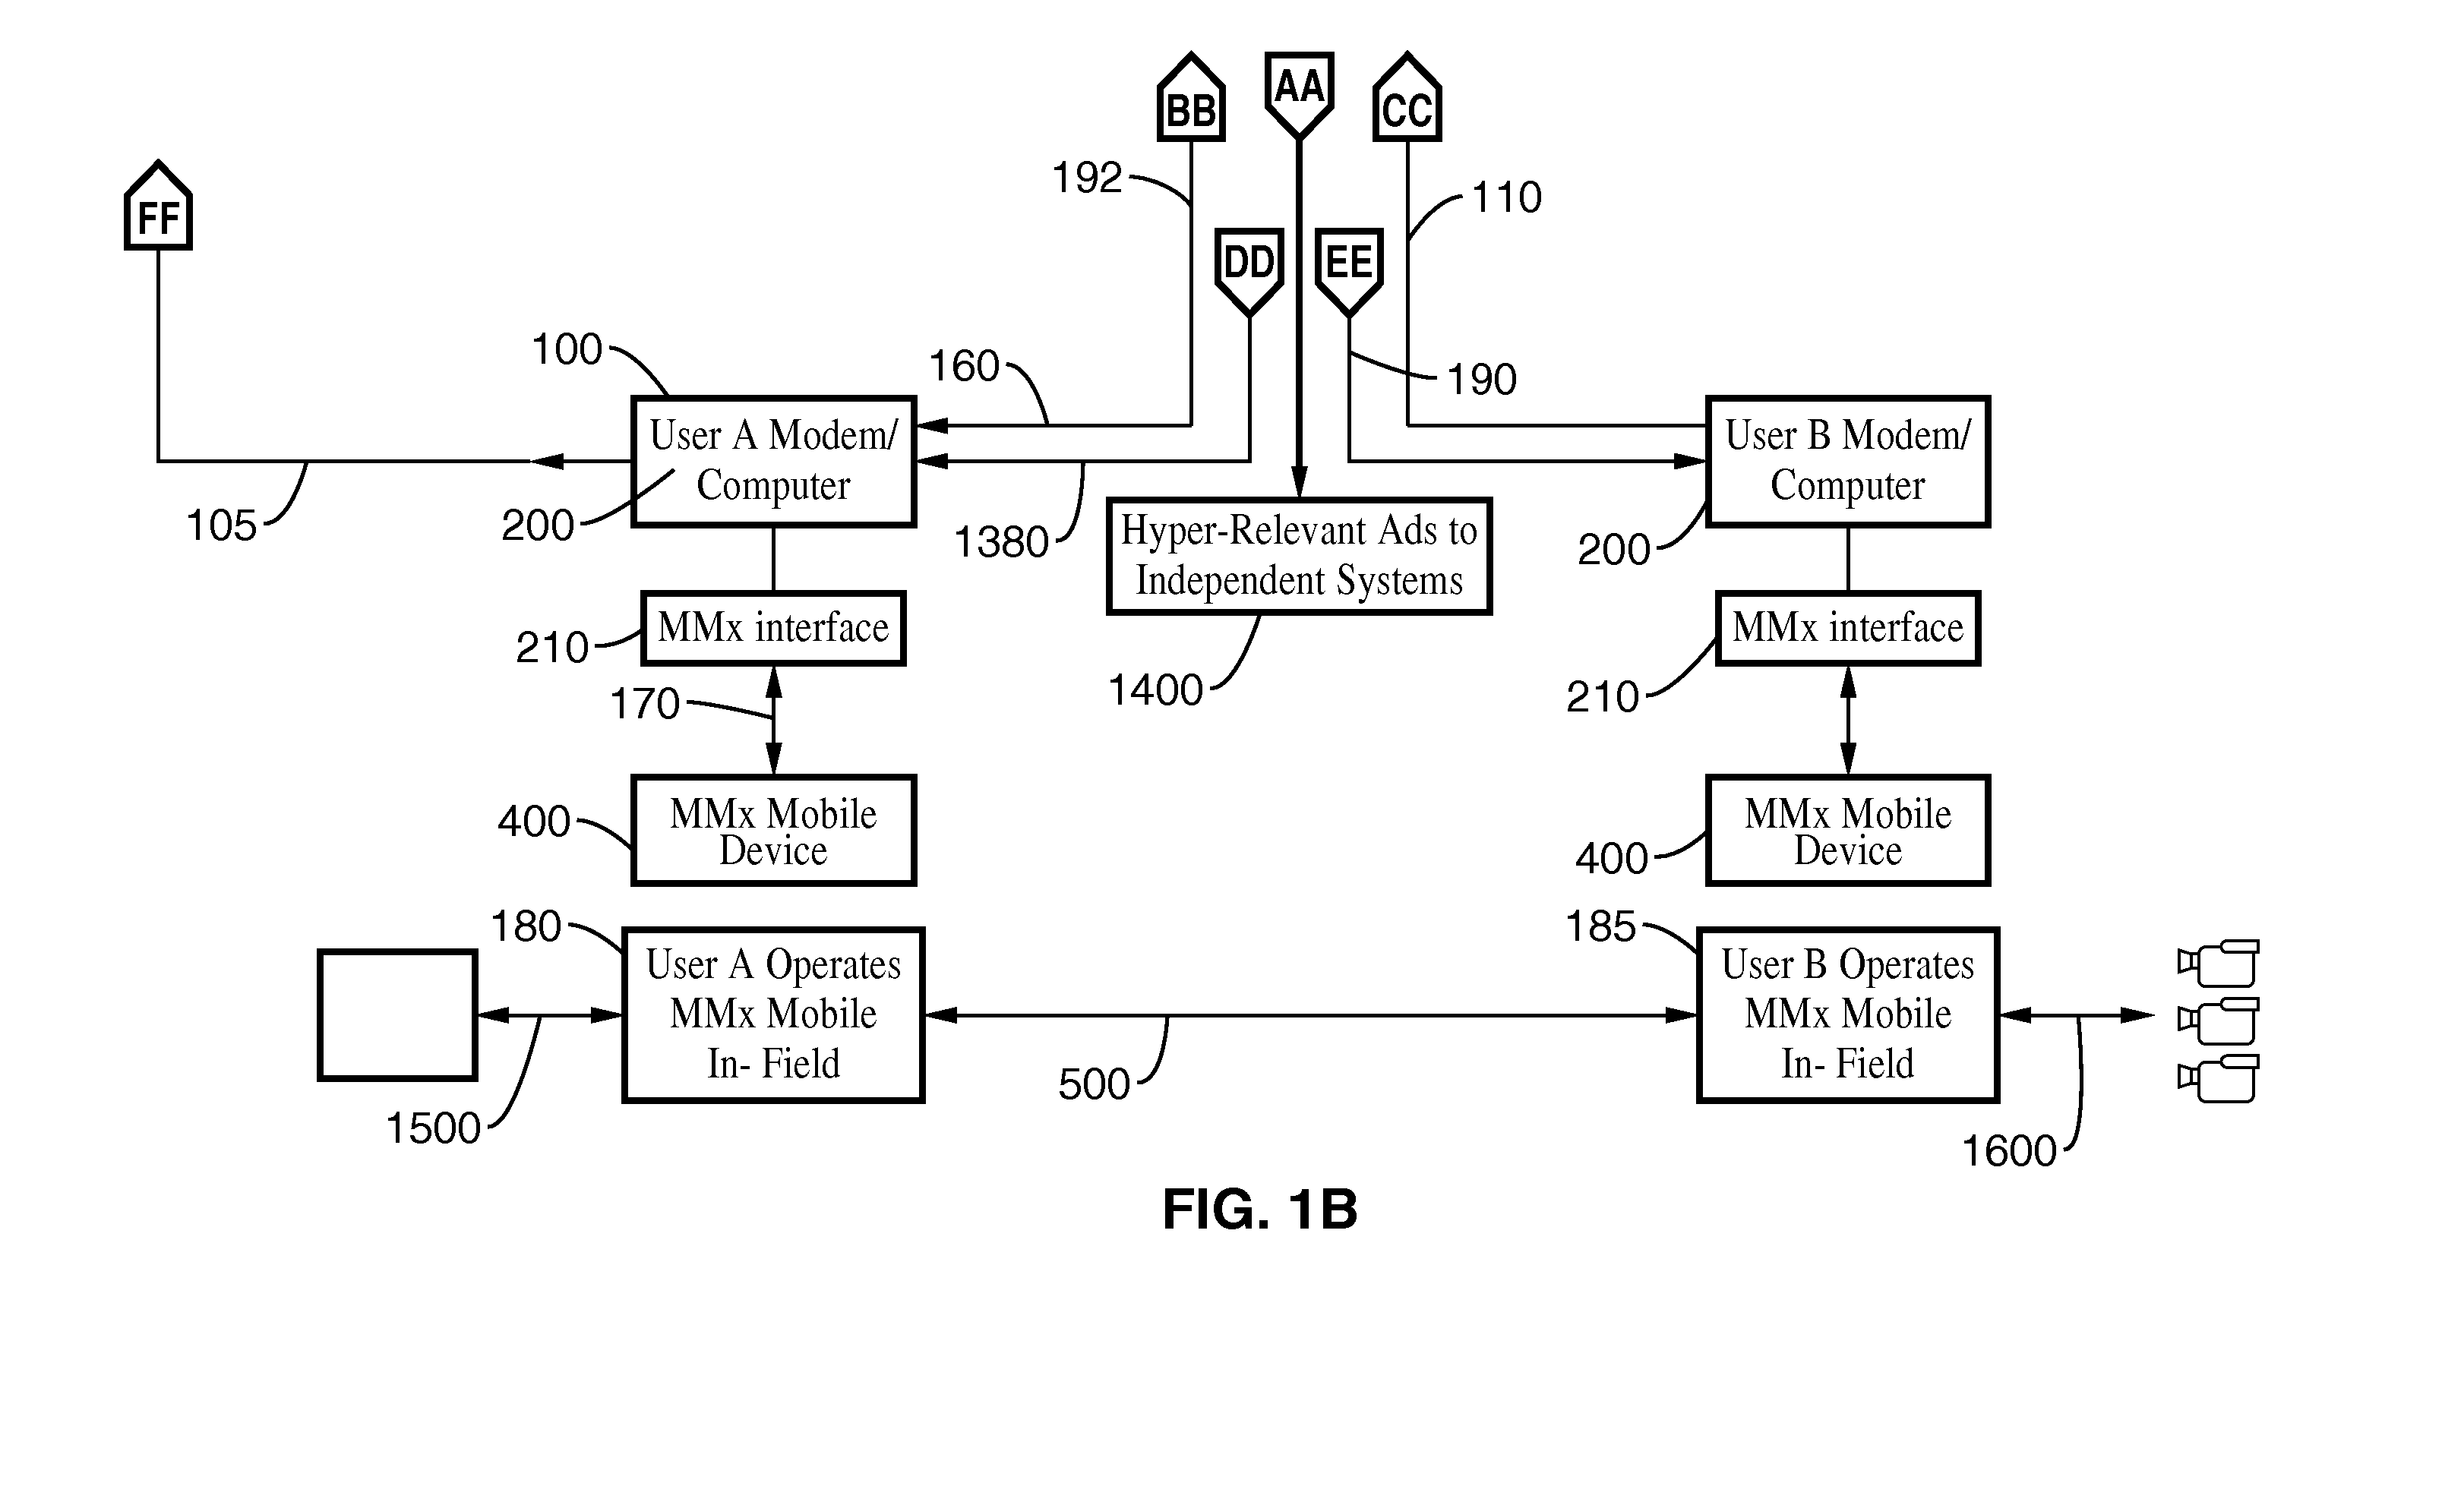 Method and apparatus for obtaining revenue from the distribution of hyper-relevant advertising through permissive mind reading, proximity encounters, and database aggregation